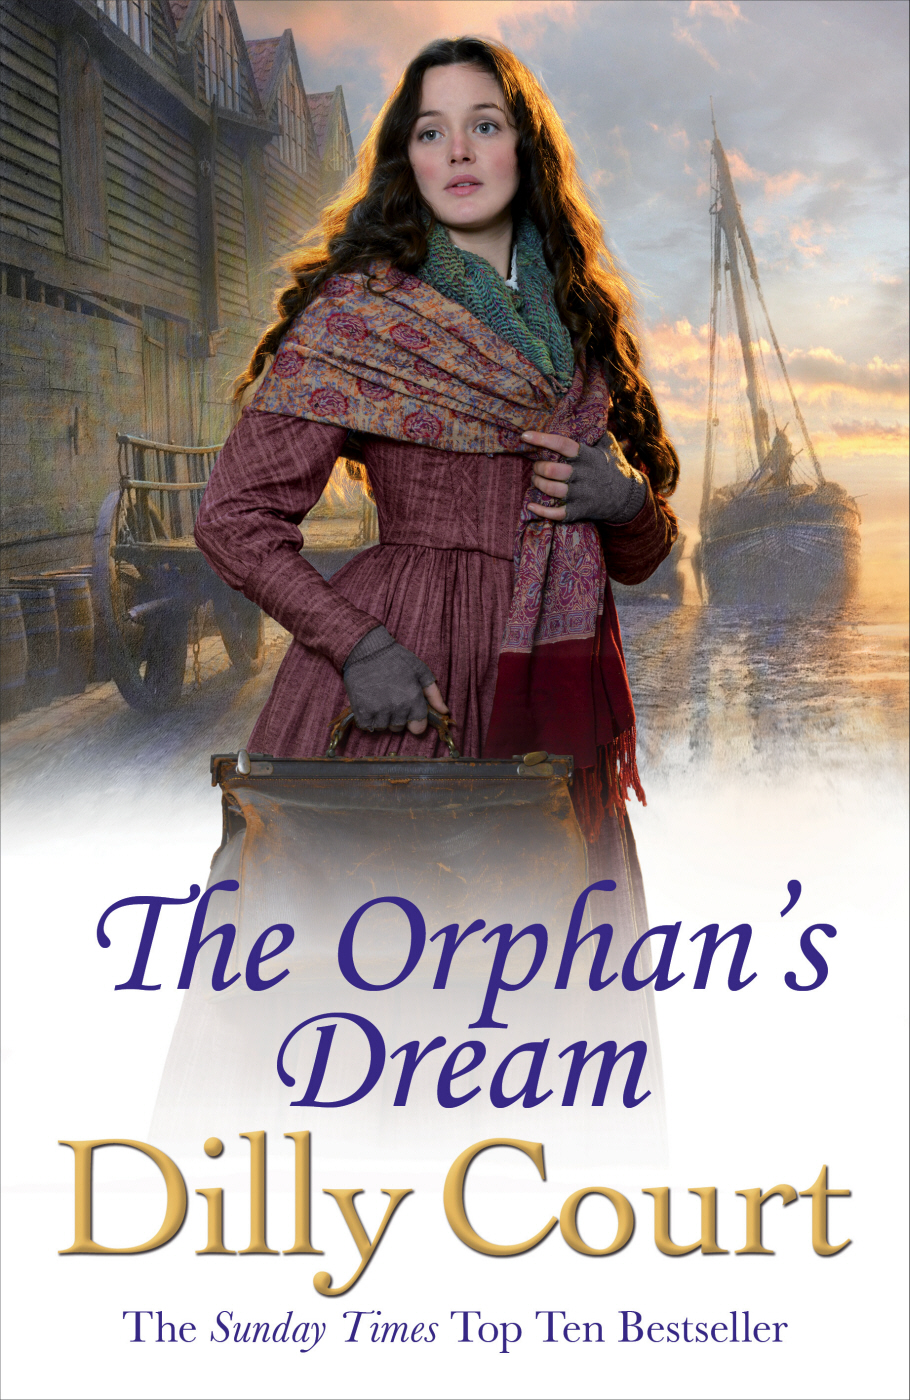 The Orphan's Dream (2015) by Dilly Court